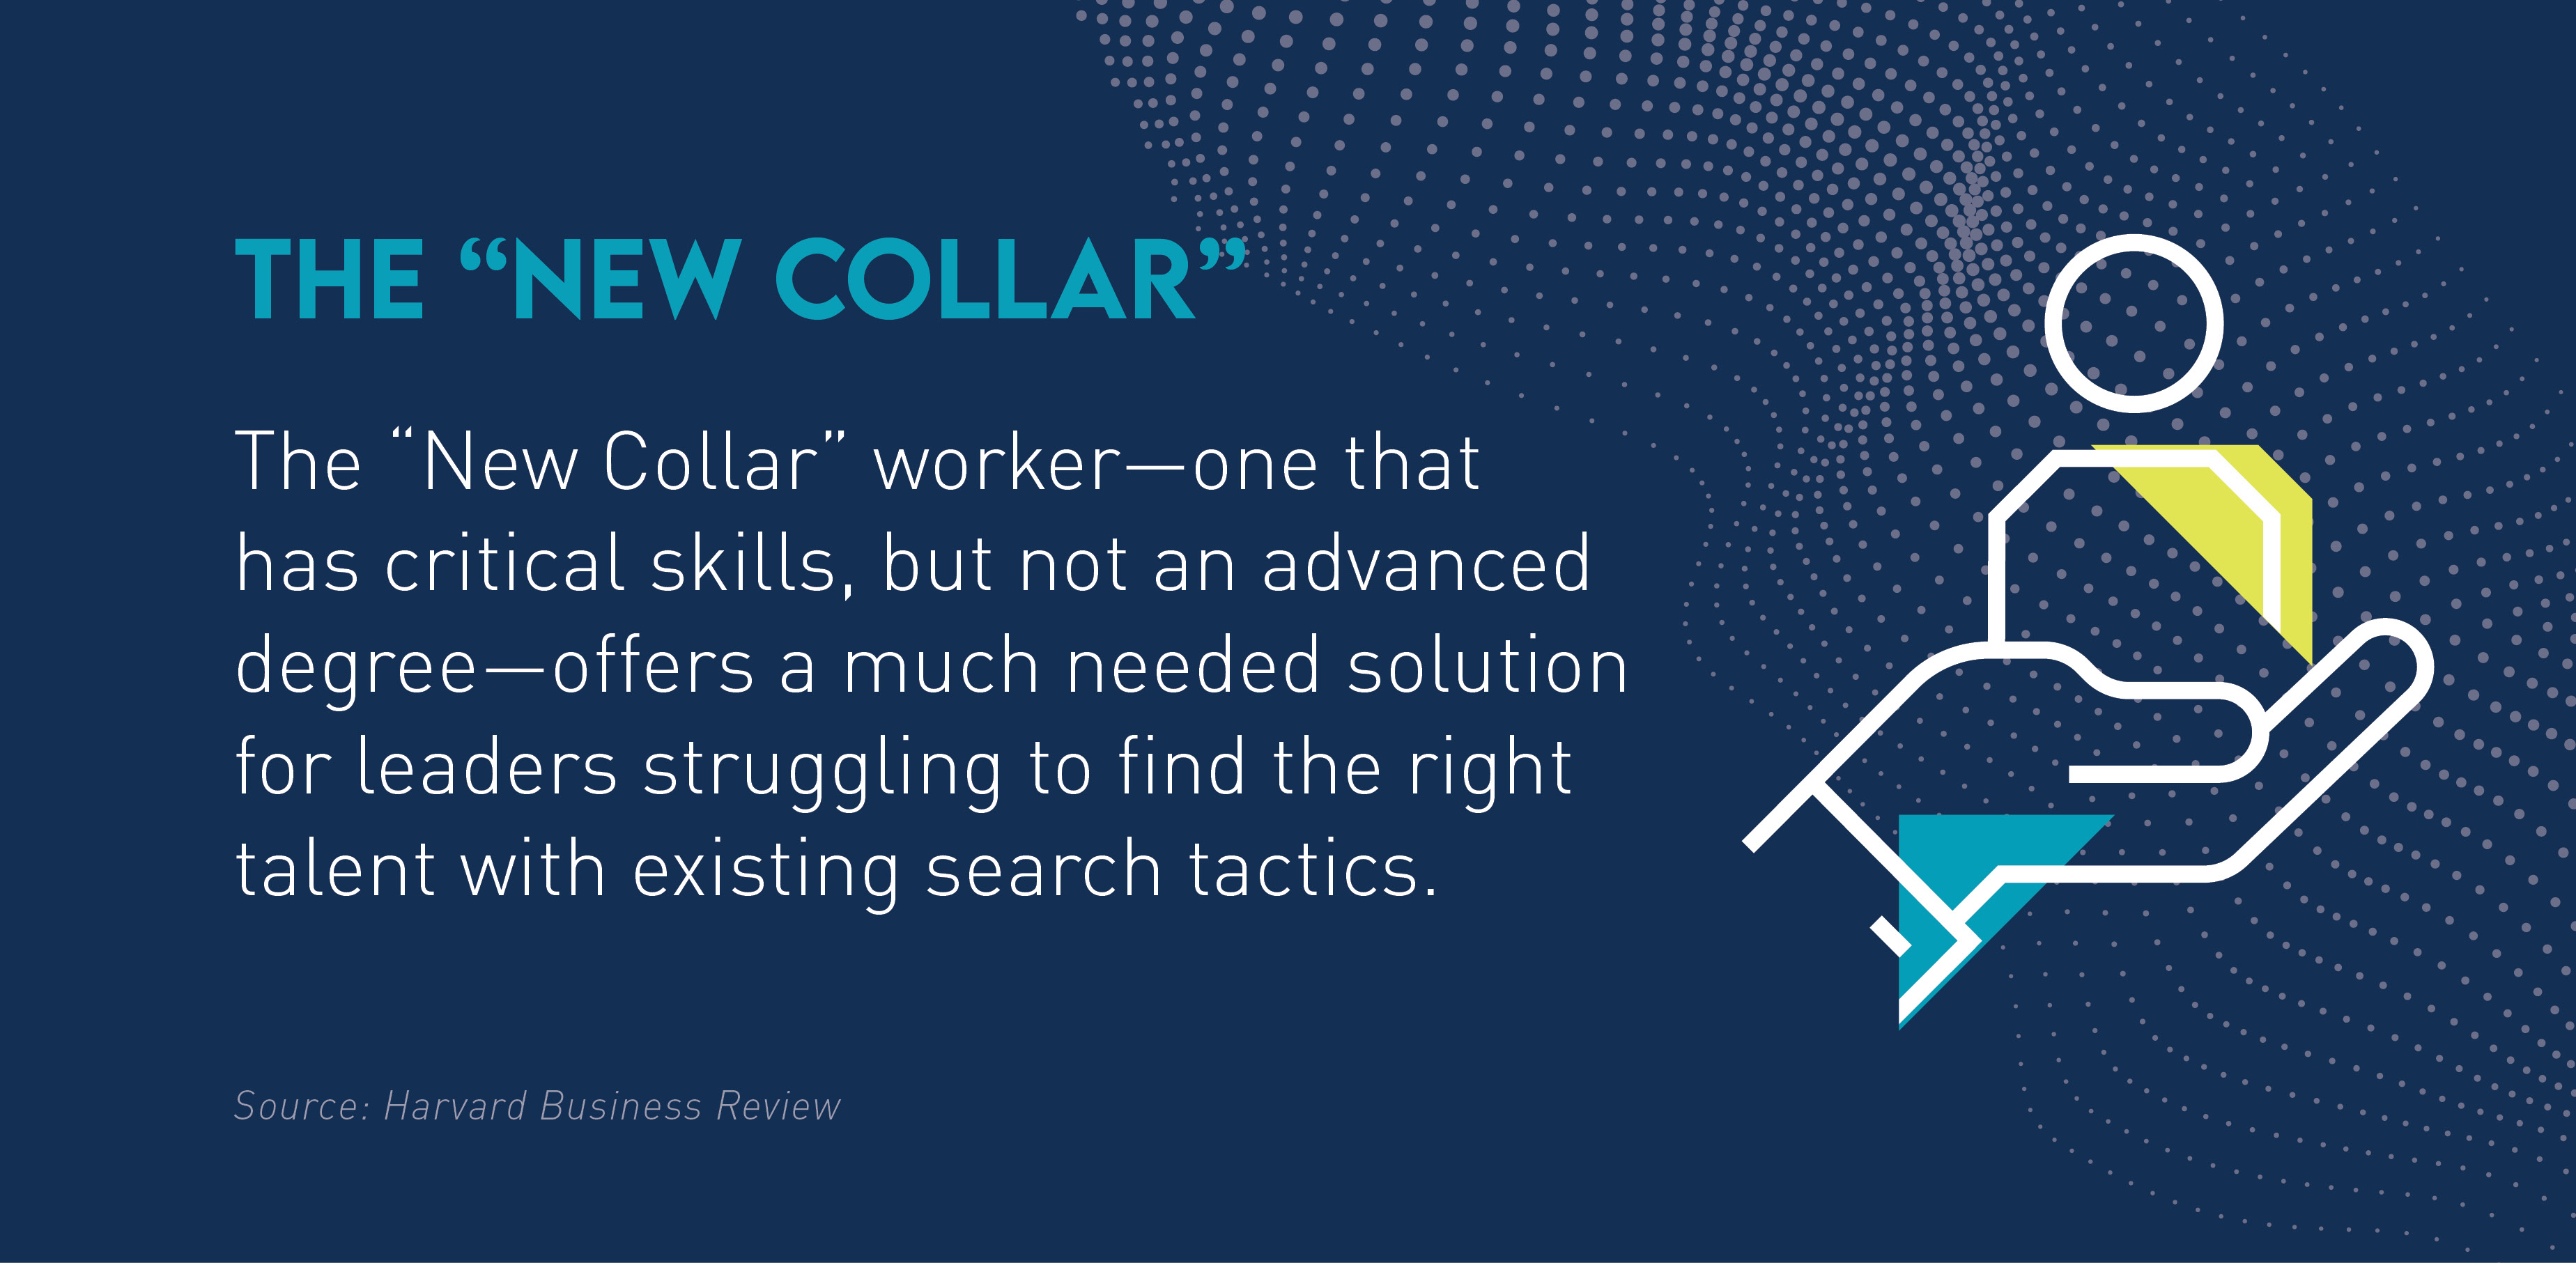 Graphic with text that says: "The "New Collar" - The "New Collar" worker - one that has critical skills, but not an advanced degree - offers a much needed solution for leaders struggling to find the right talent with existing search tactics."